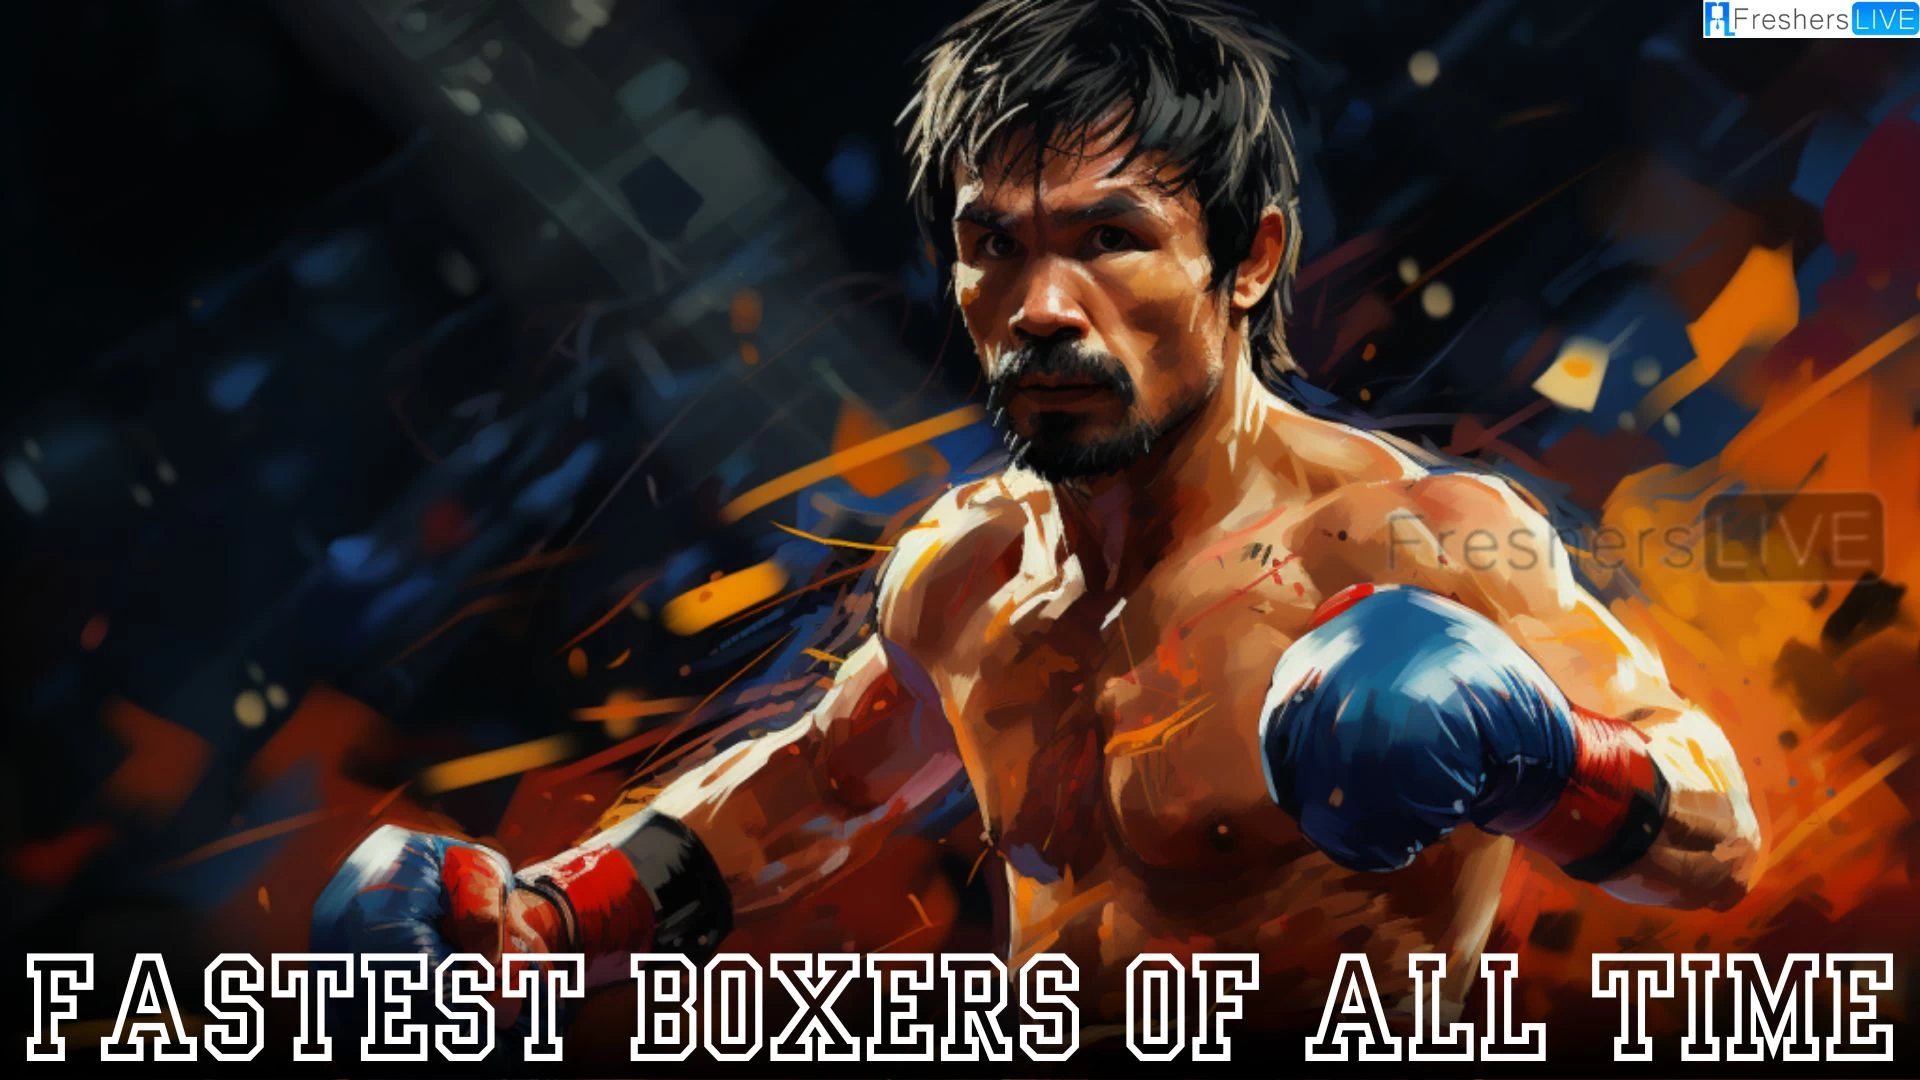 Fastest Boxers of All Time - Top 10 Masters of the Boxing Blitz